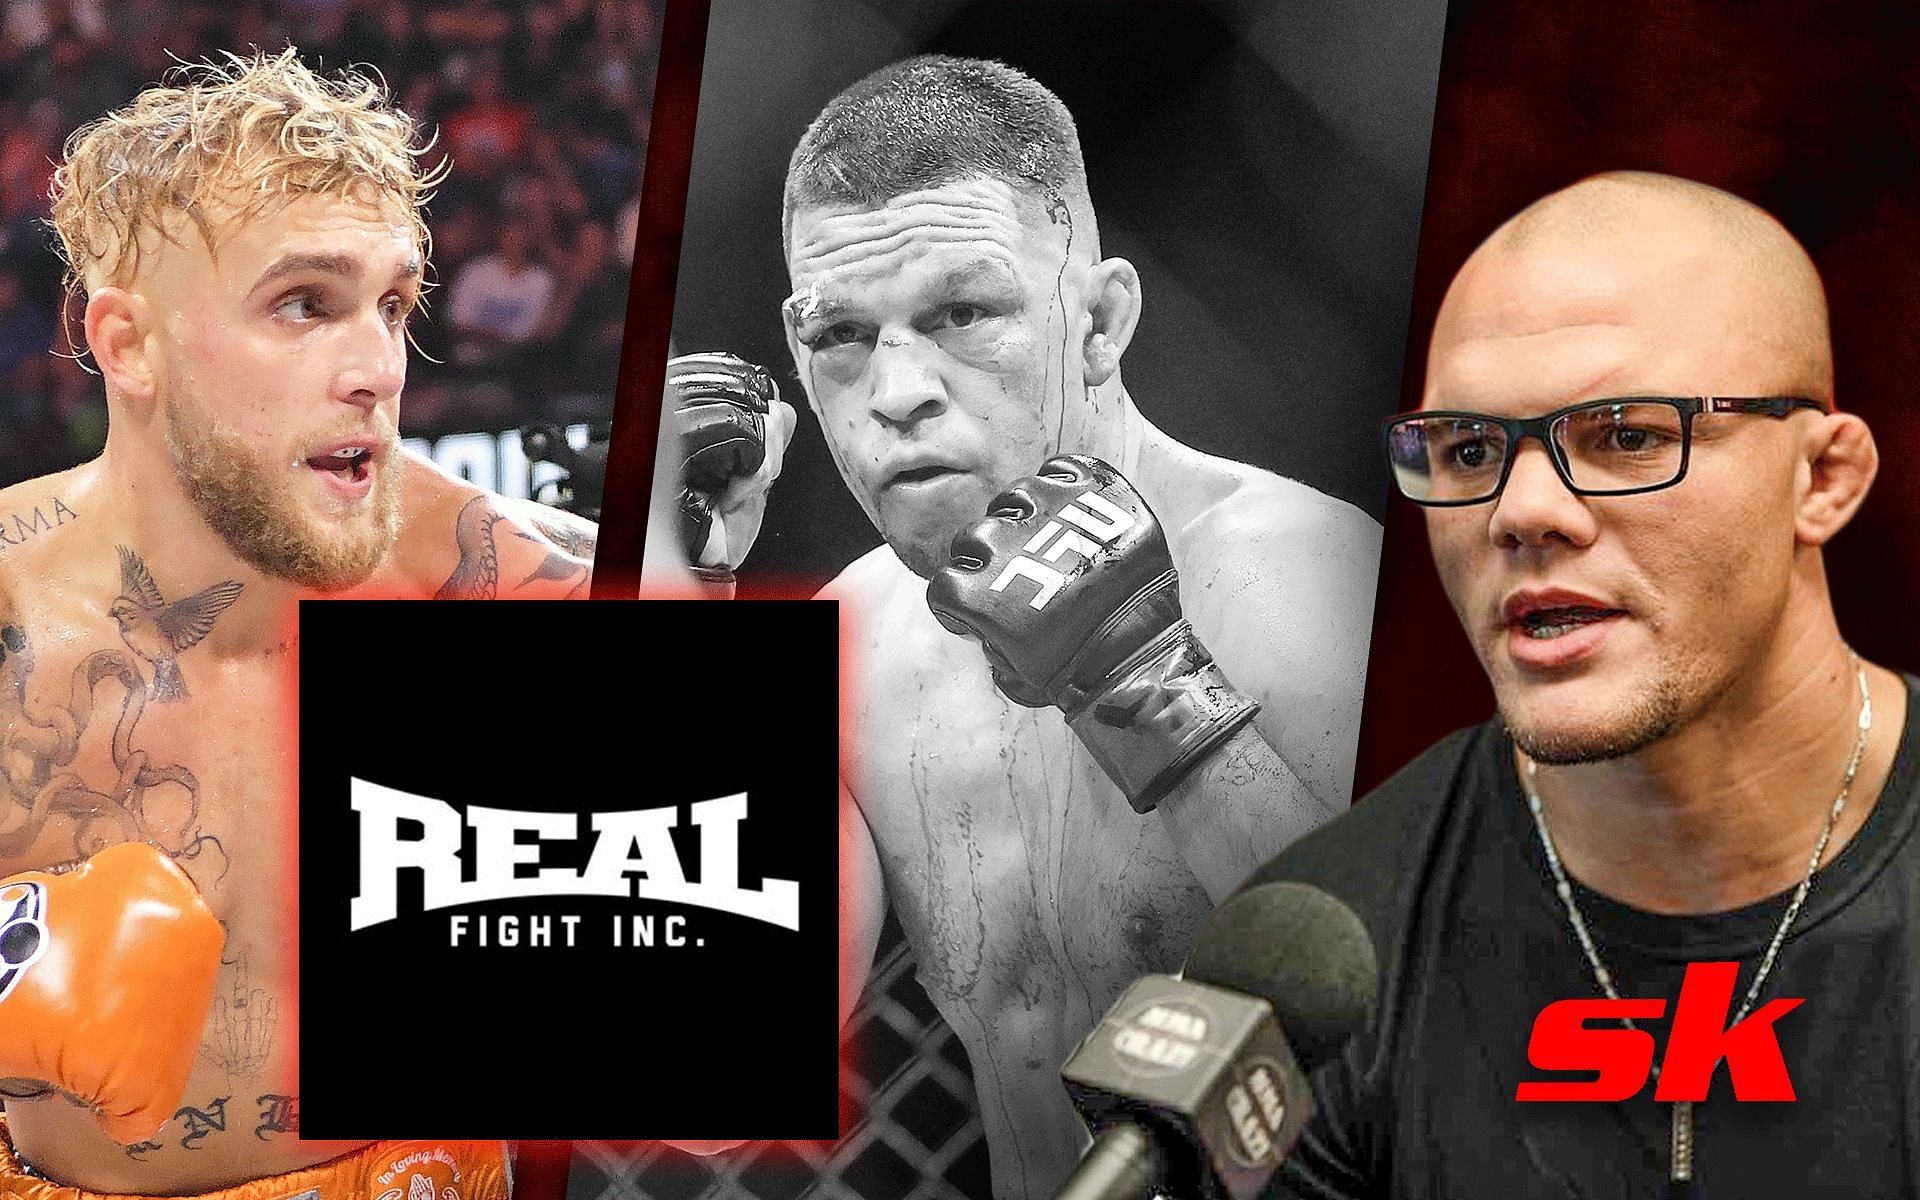 Jake Paul (left), Nate Diaz (center), Anthony Smith (right). [Images courtesy: left image from Instagram @lionheartsmith, logo from Instagram @realfightinc, rest from Getty Images]